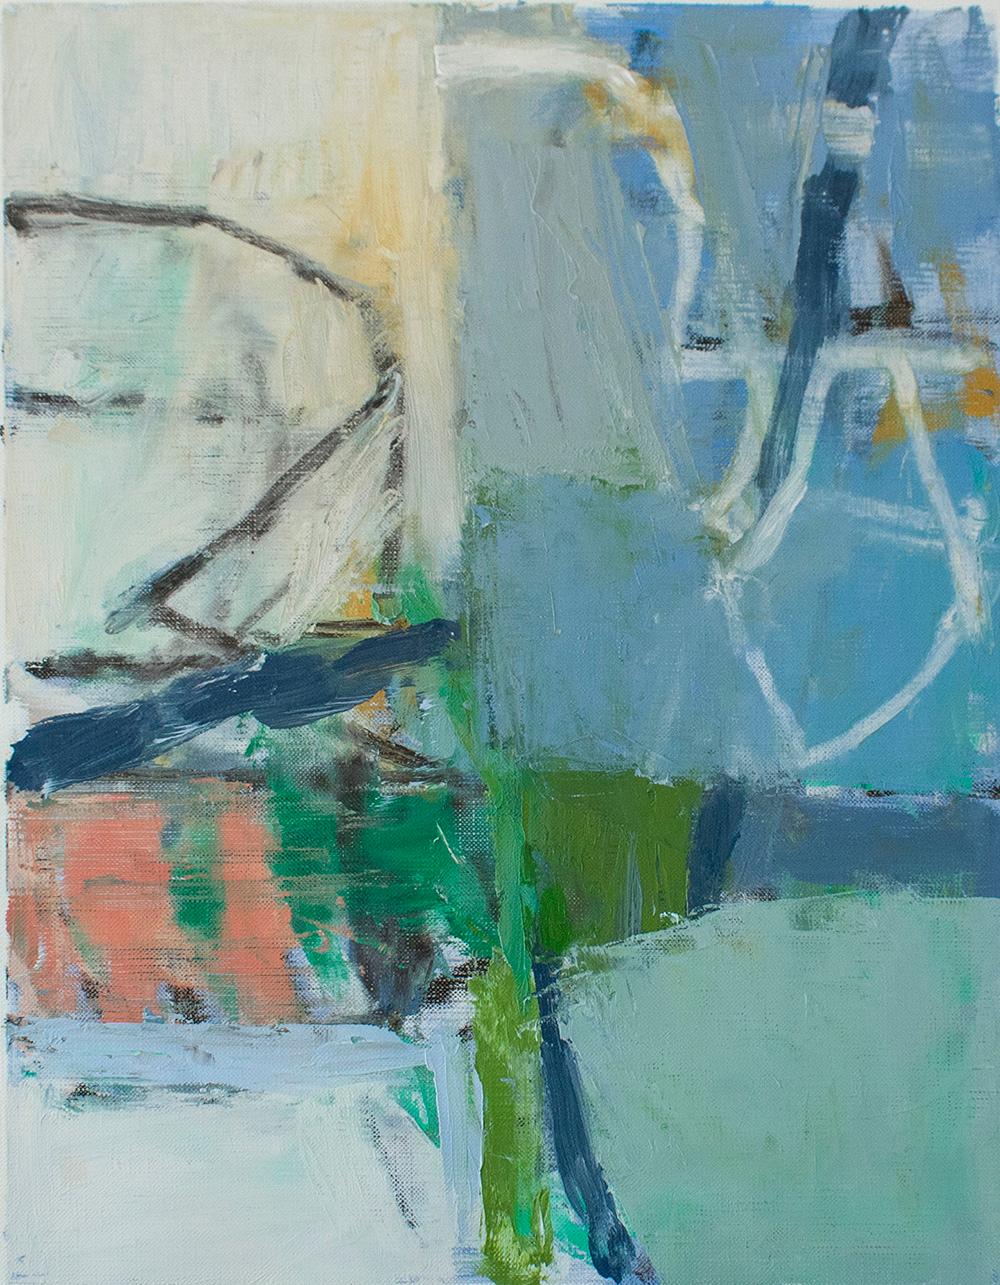 Jenny Nelson Abstract Painting - No. 5 (Blue & Green): Small Abstract Expressionist Painting on Canvas Paper